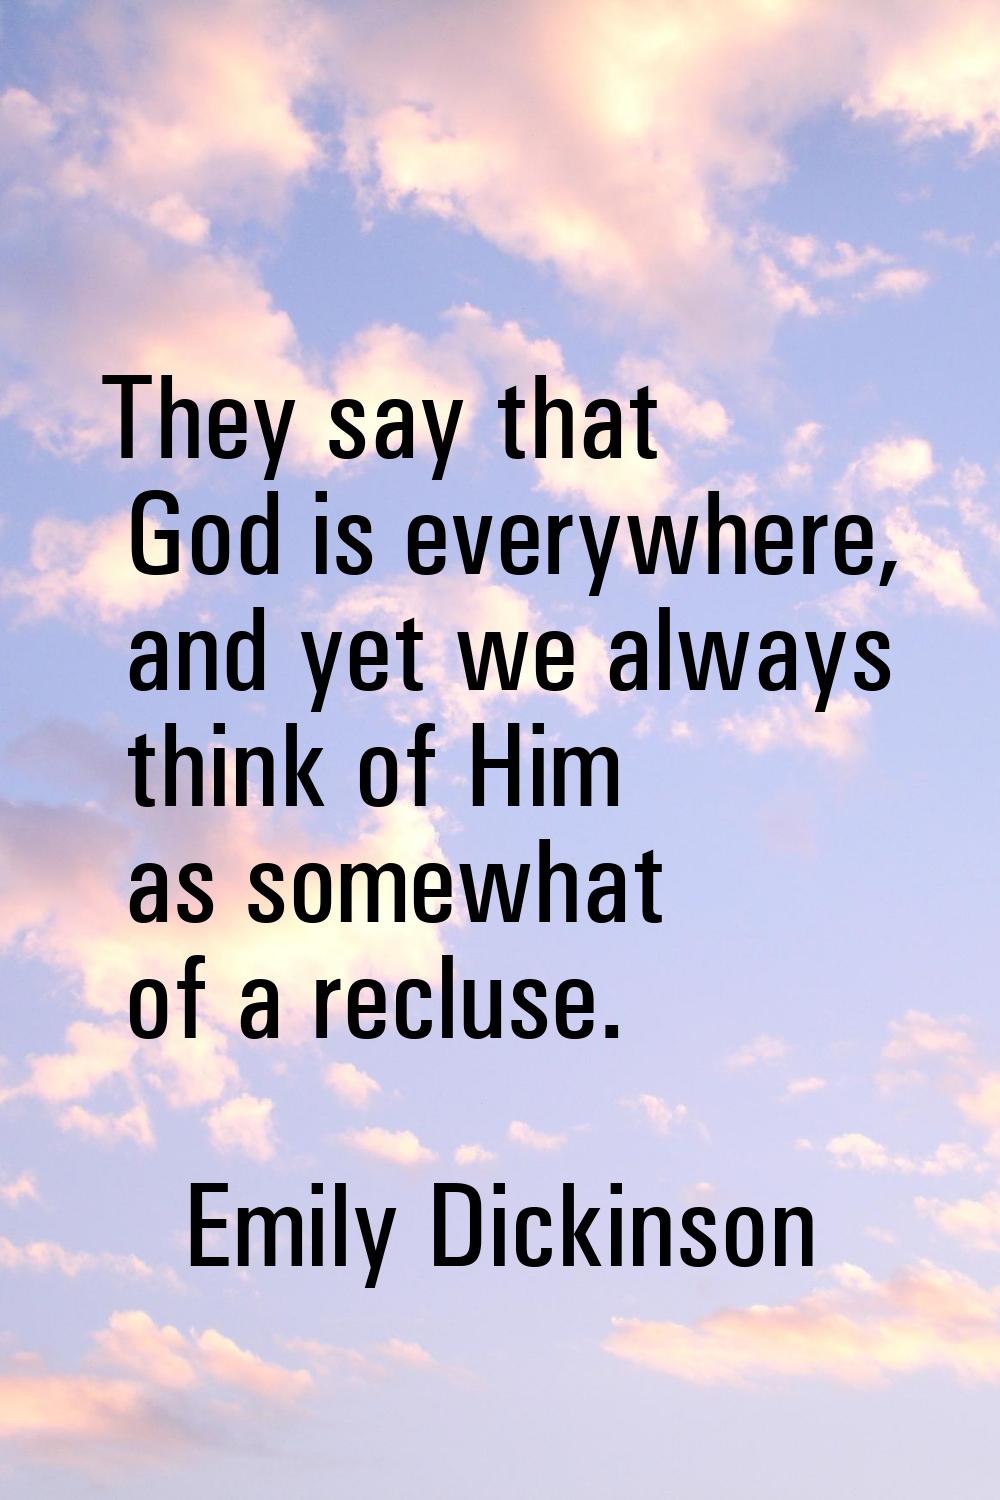 They say that God is everywhere, and yet we always think of Him as somewhat of a recluse.